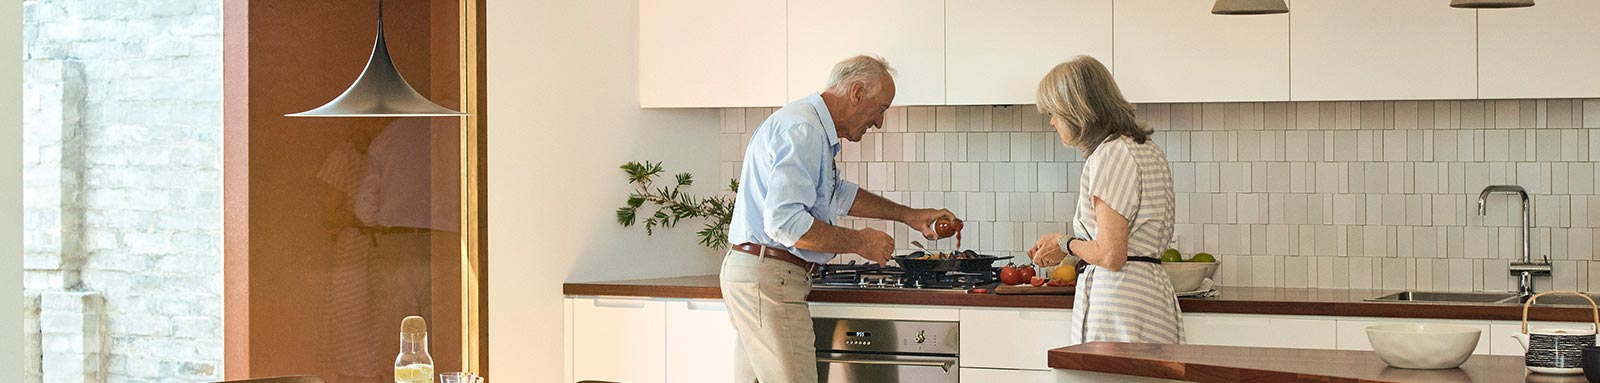 A retired couple cooking muselis in kitchen